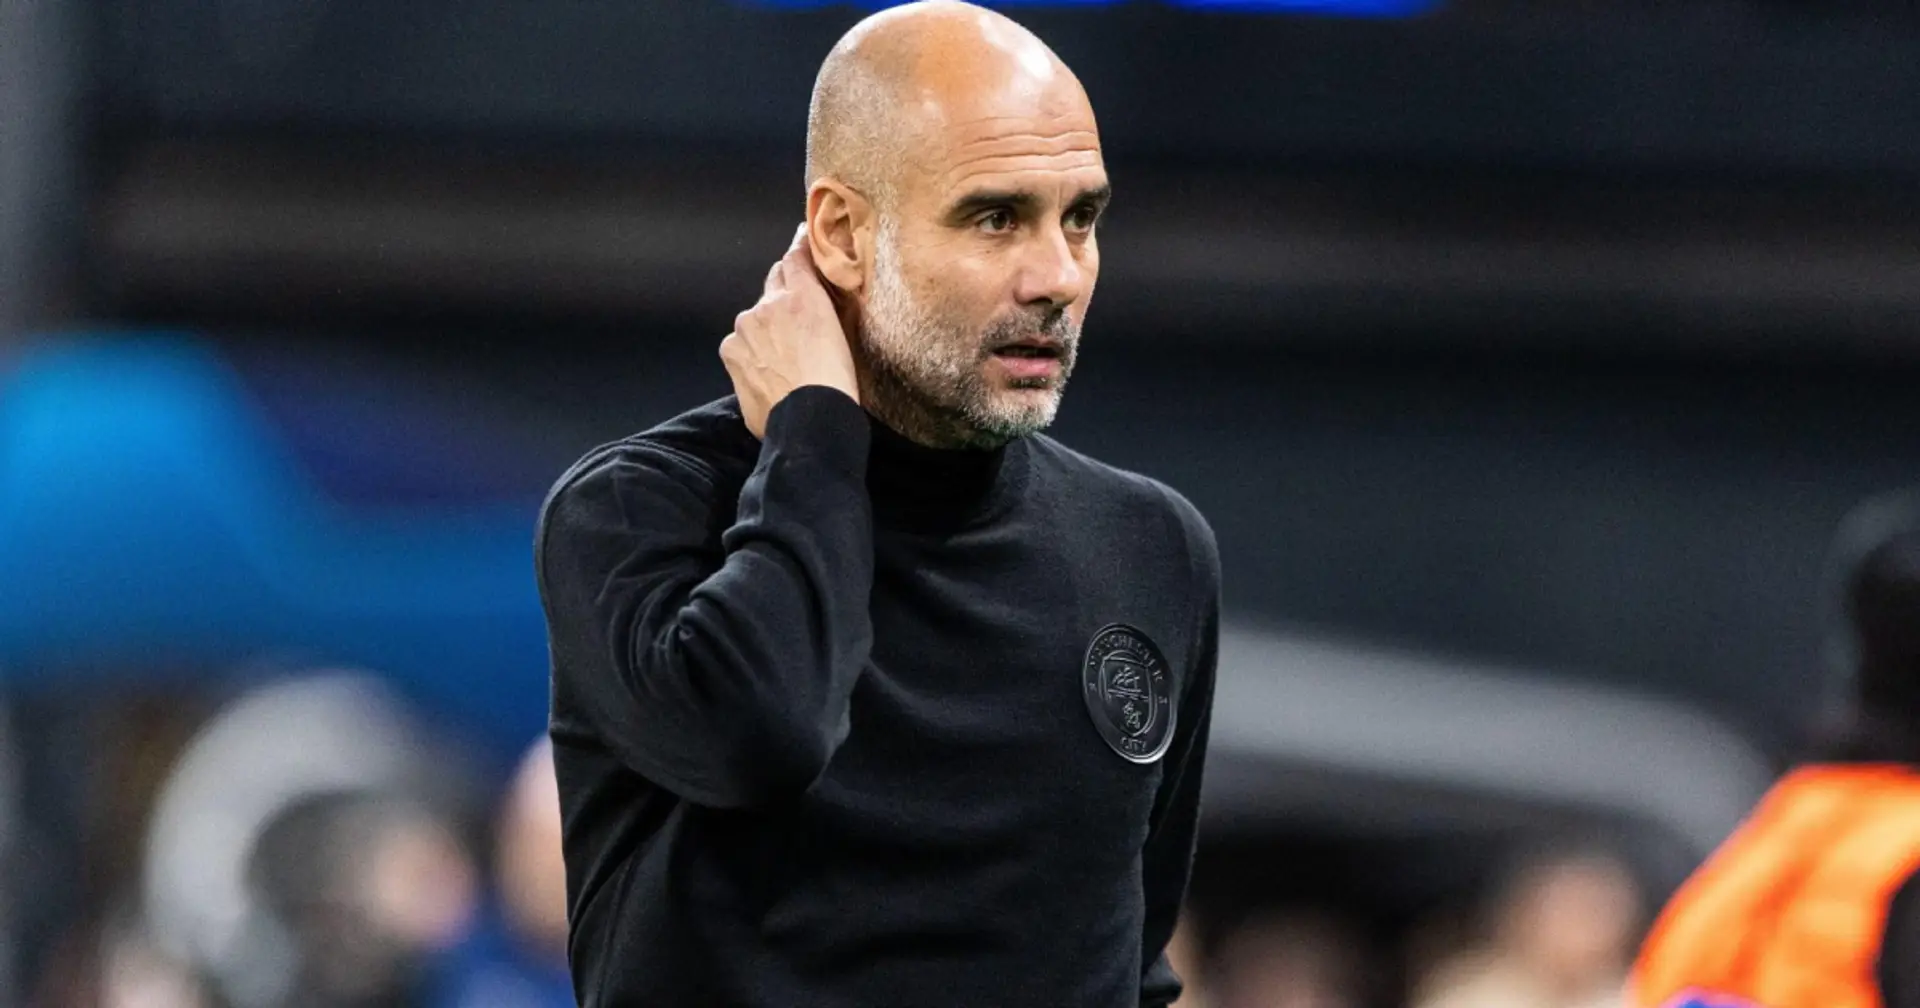 Pep Guardiola undergoes surgery, won't be manager for upcoming Premier League clash